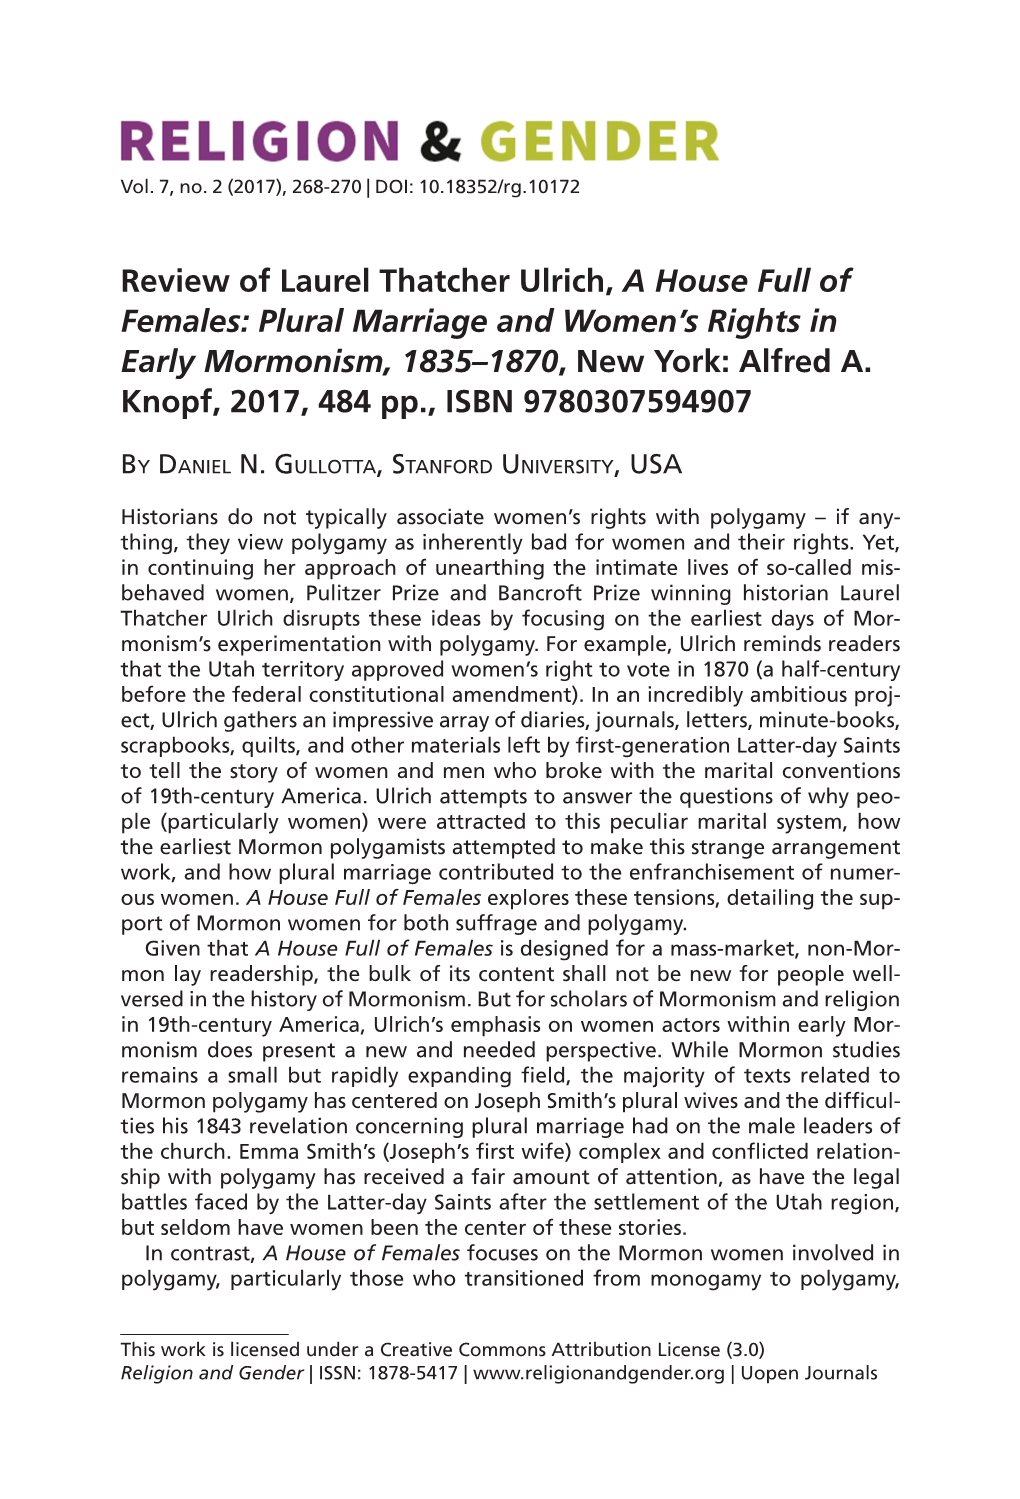 Review of Laurel Thatcher Ulrich, a House Full of Females: Plural Marriage and Women’S Rights in Early Mormonism, 1835–1870, New York: Alfred A